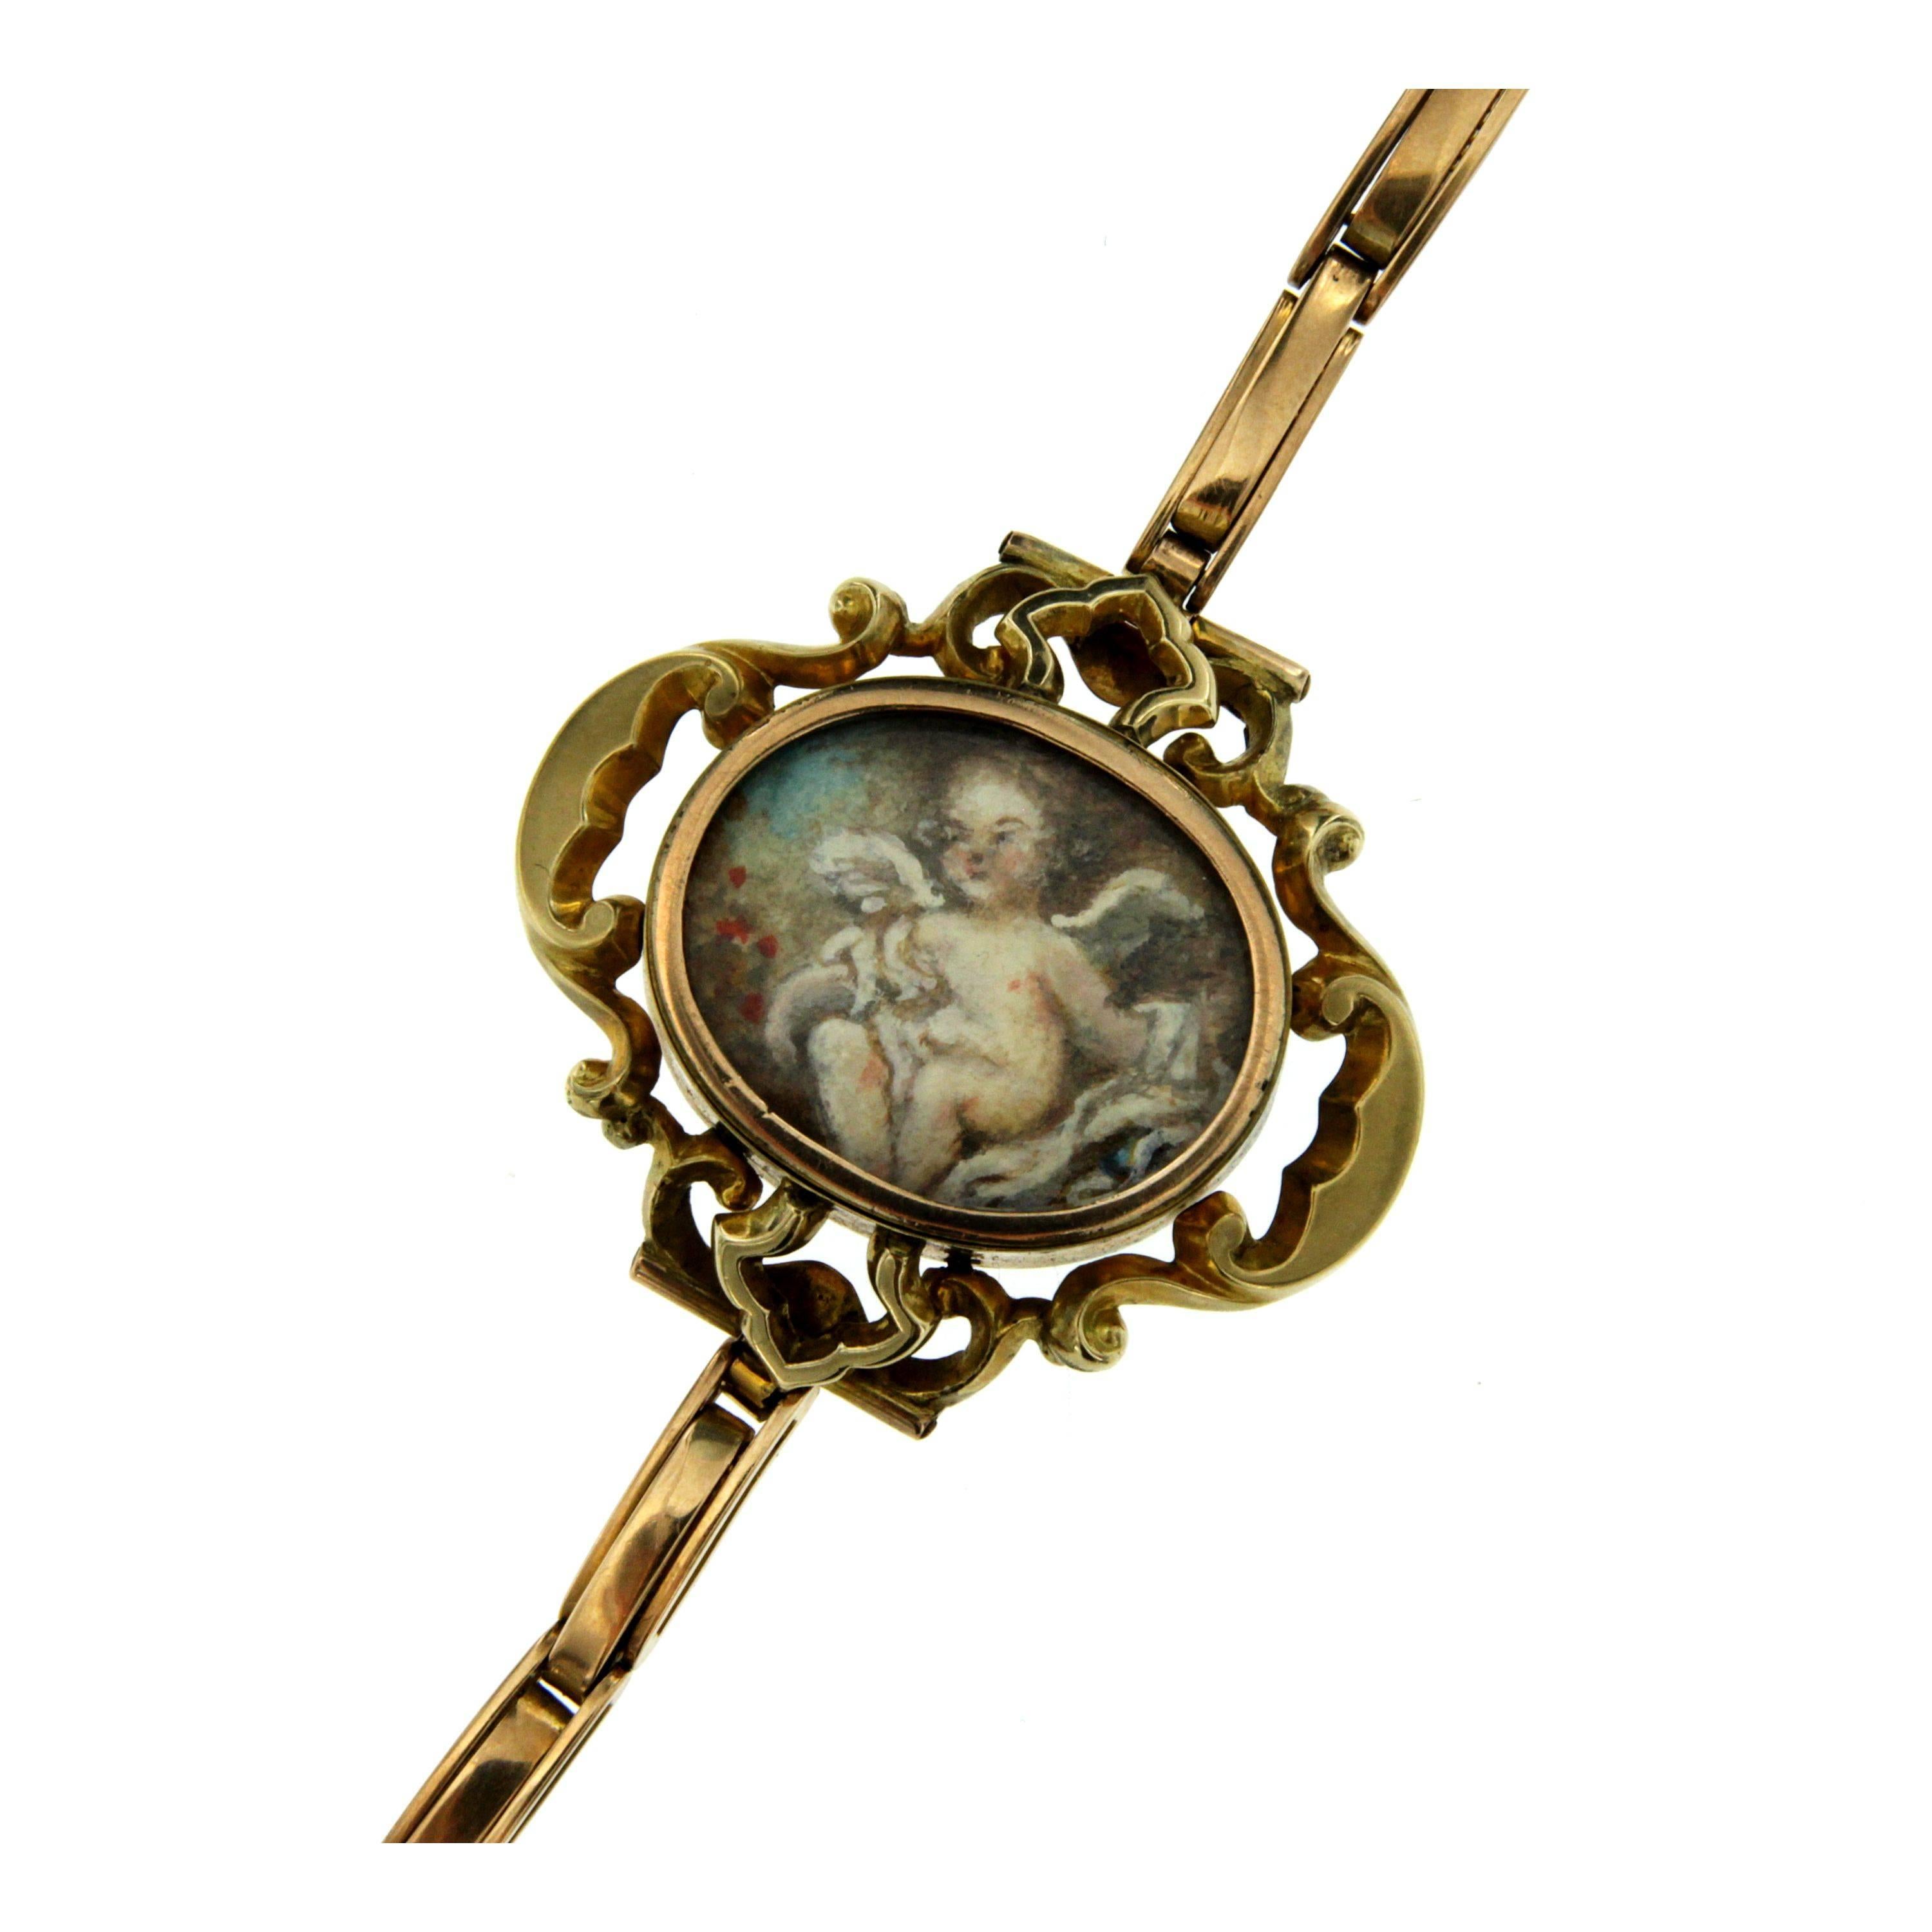 This Art Nouveau bracelet is crafted in 9k rose gold and is adorned with a large frame in the center. 
This handmade bracelet has elastic links to adapt to every size.
Safety clasp. Circa 1920 

CONDITION: Pre-Owned - Very good
METAL: 9k Gold 
FRAME